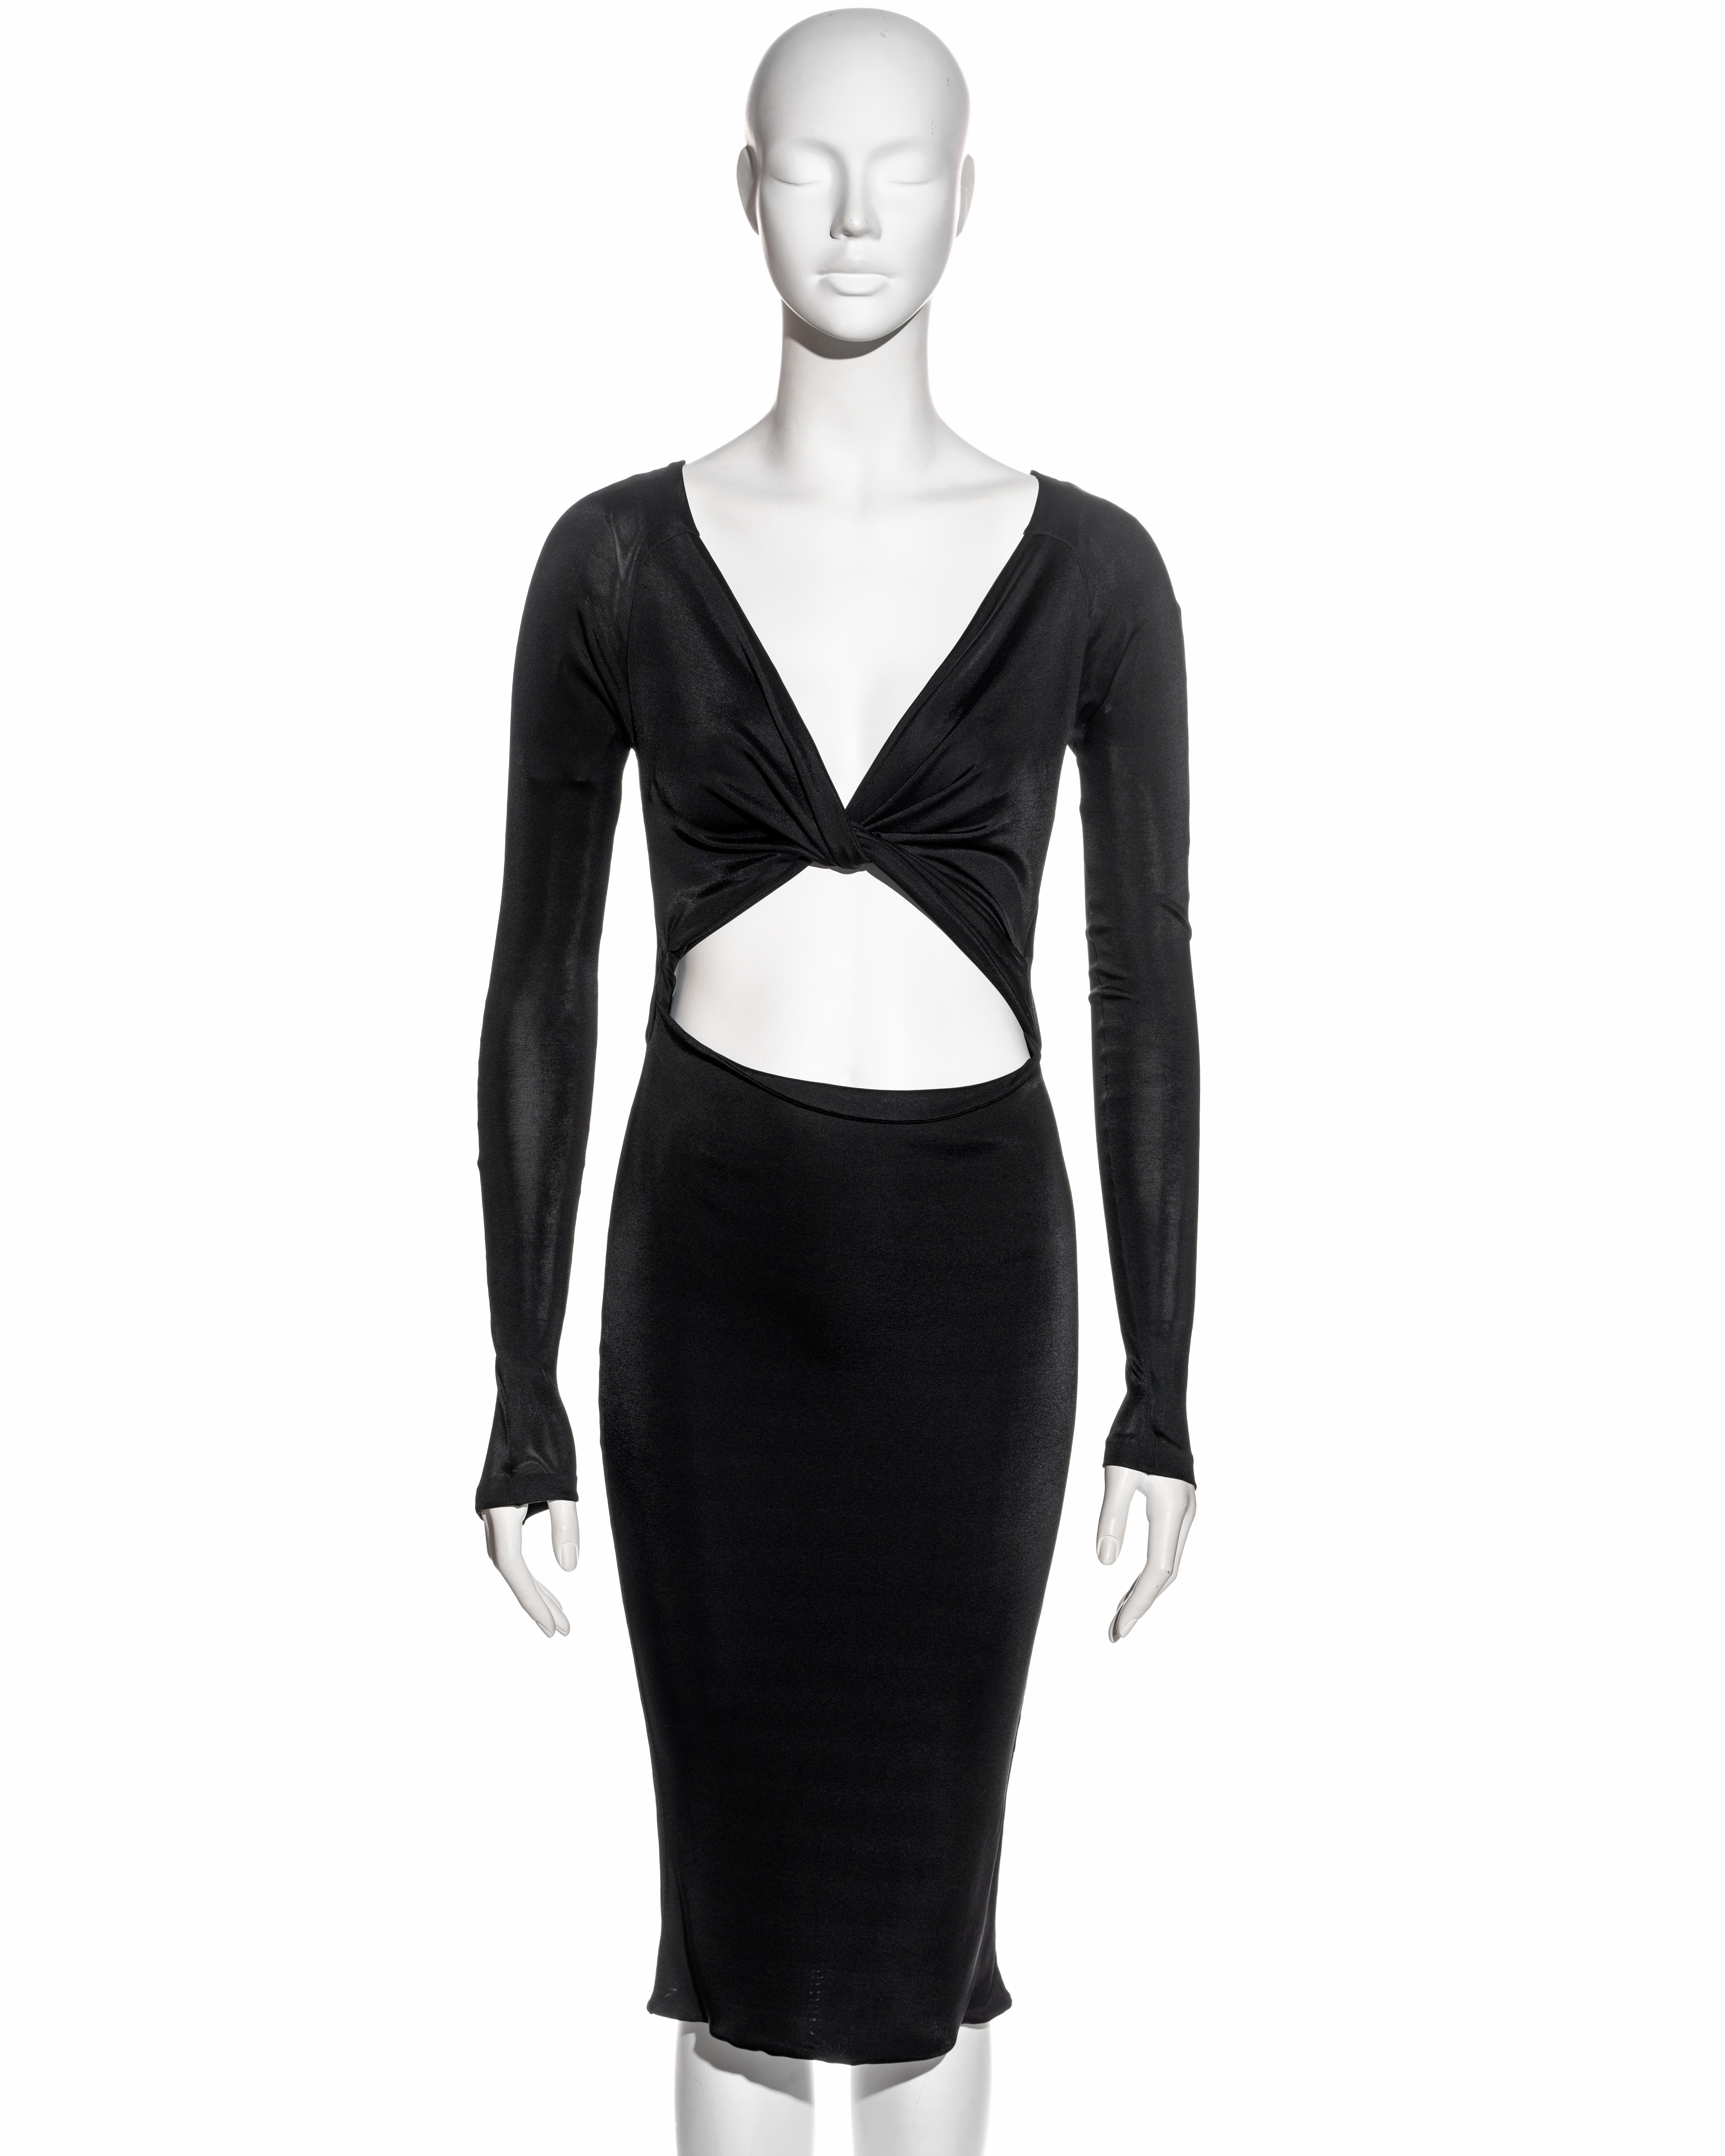 ▪ Gucci black long sleeve evening dress
▪ Designed by Tom Ford 
▪ Plunge v-neckline
▪ Knotted front
▪ Bare midriff  
▪ Open back 
▪ Four long ties fastening at the back which can be styled in various ways
▪ Size Medium
▪ Fall-Winter 2003
▪ 50%